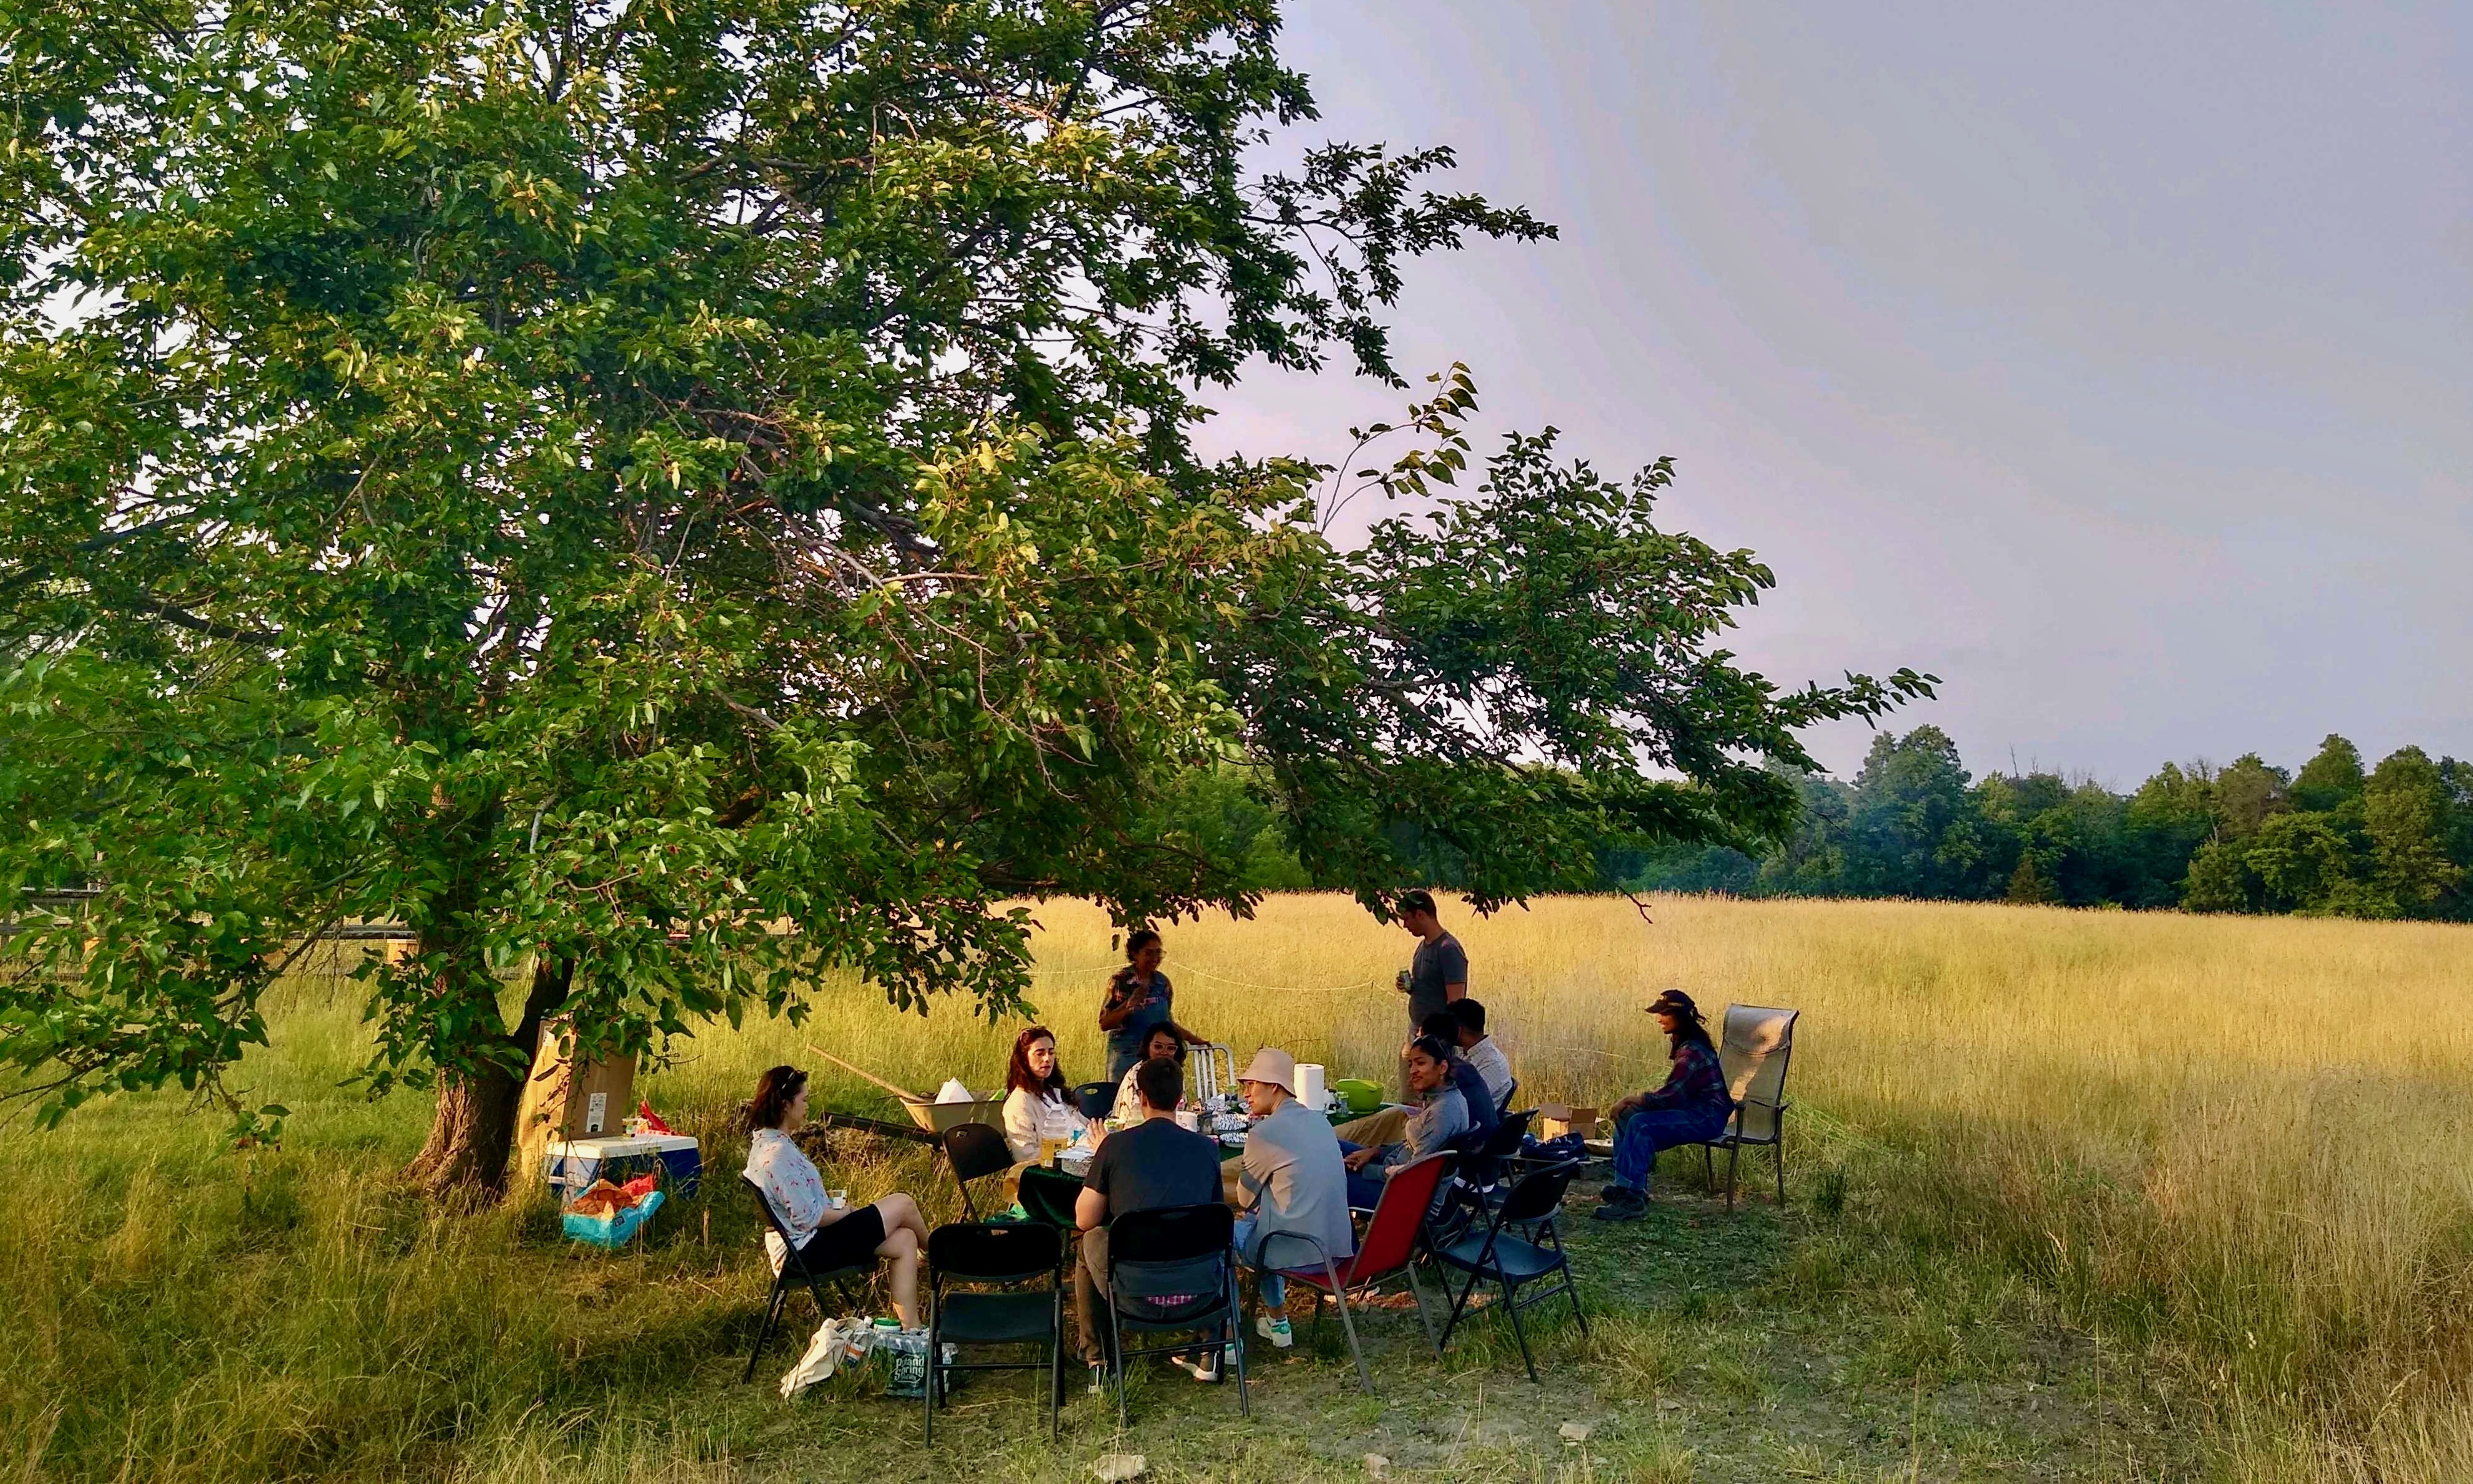 Aurora Solar’s Autoroof team at an outdoor gathering in a field under a mature tree.